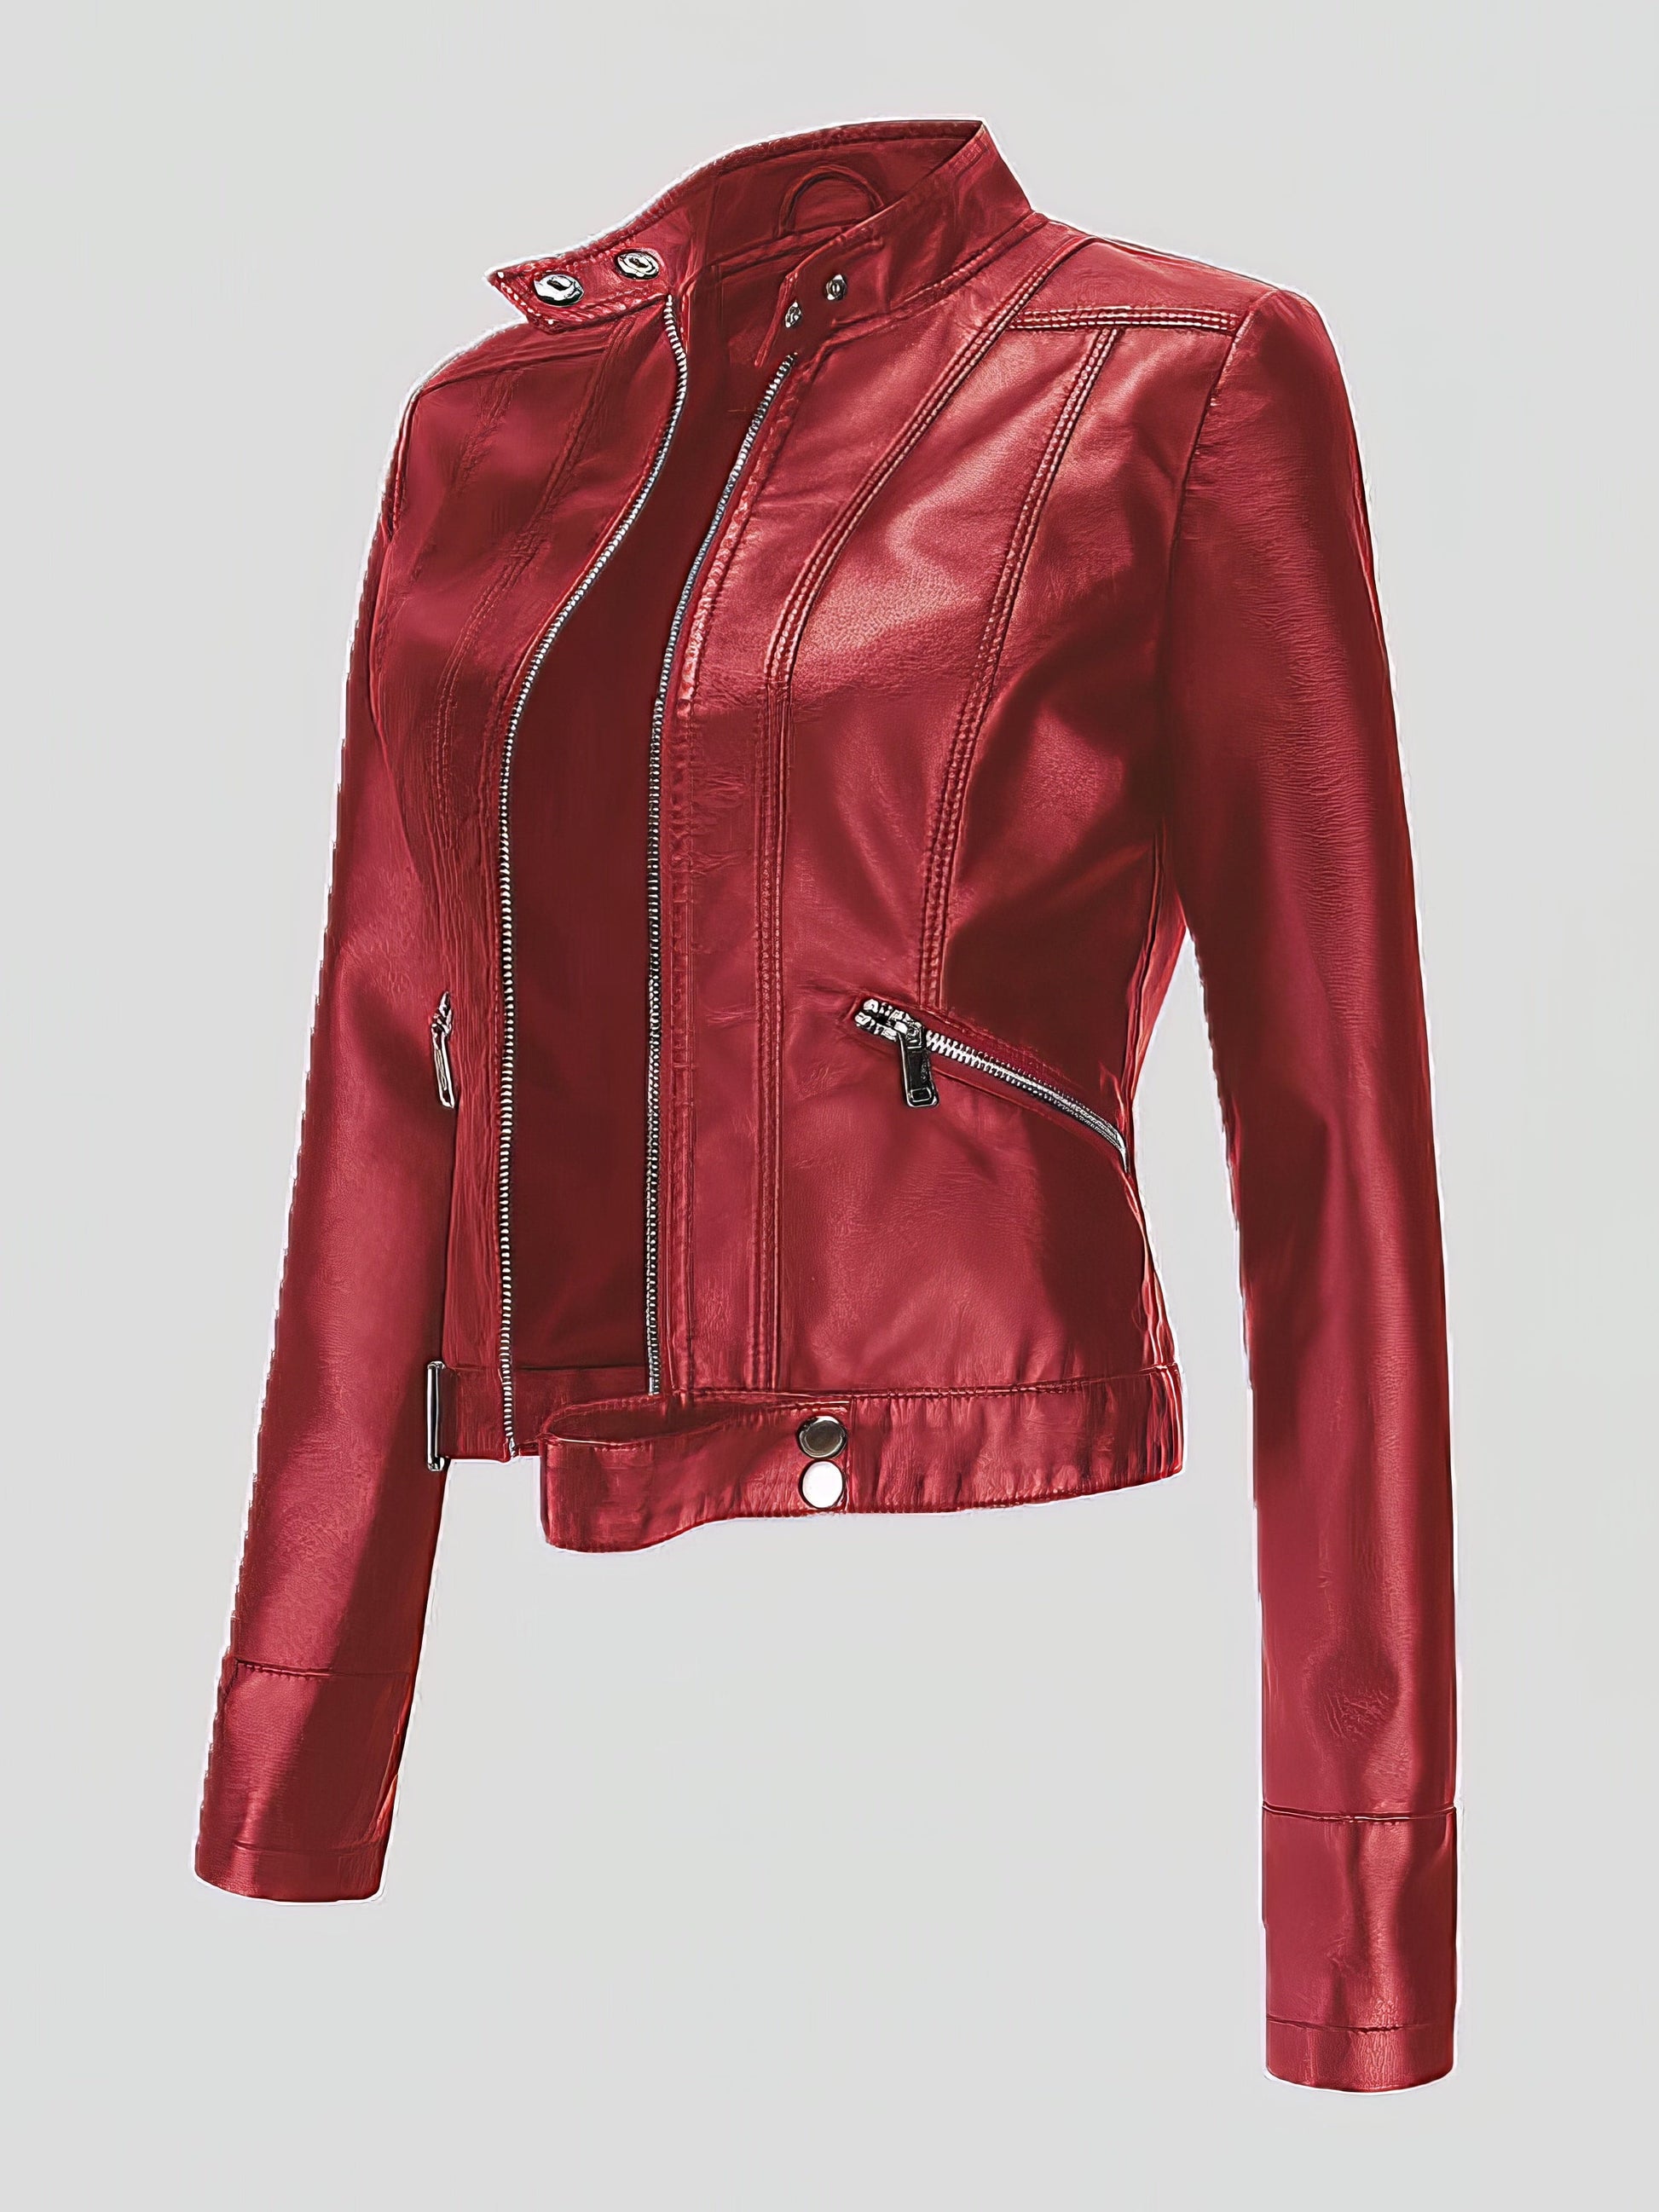 MsDressly Short Stand-Up Collar Zipped Leather Jacket Jackets Short Stand-Up Collar Zipped Leather Jacket Jackets